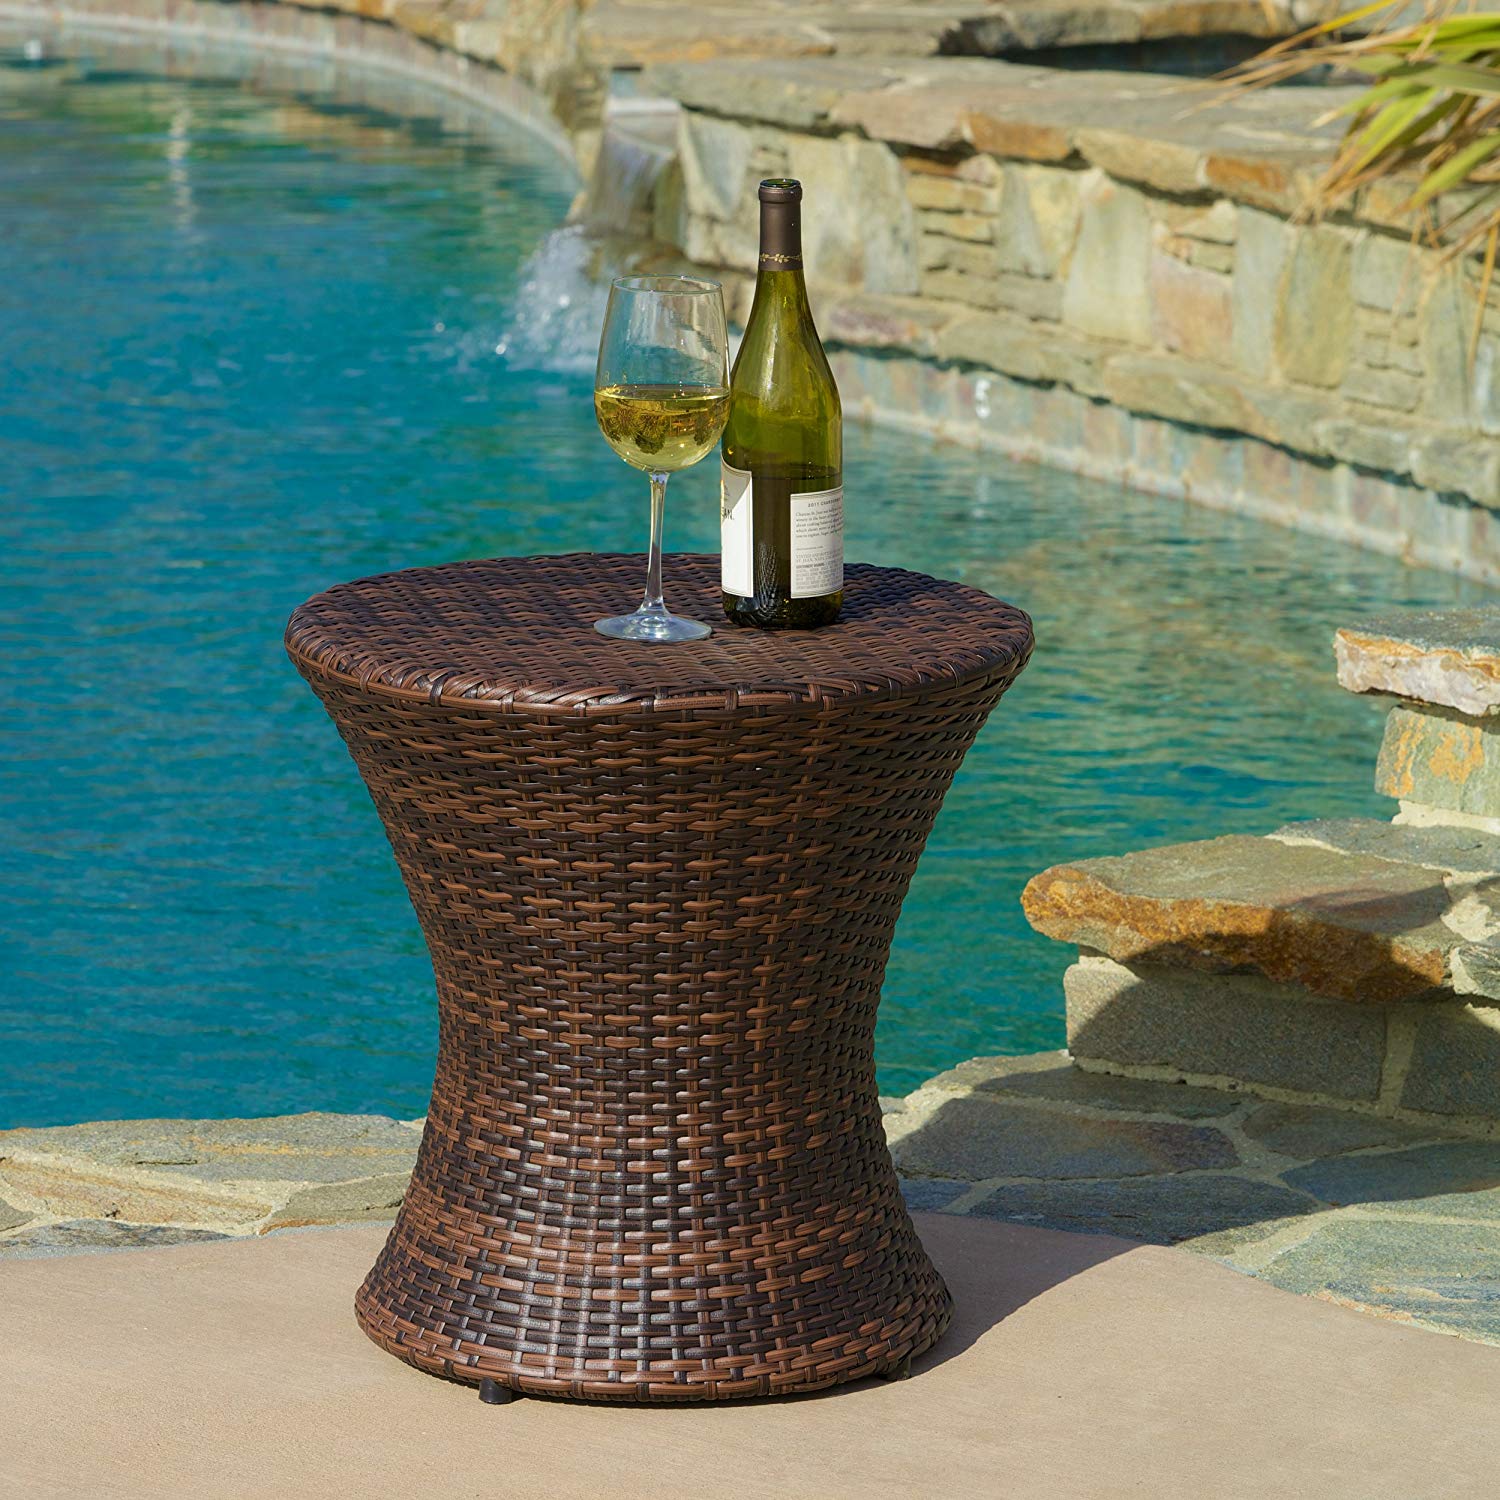 enjoyable ideas outdoor accent table just another wordpress site super cool lorenzo grey wicker garden tables clearance with storage aqua blue tiffany leadlight lamps unique patio